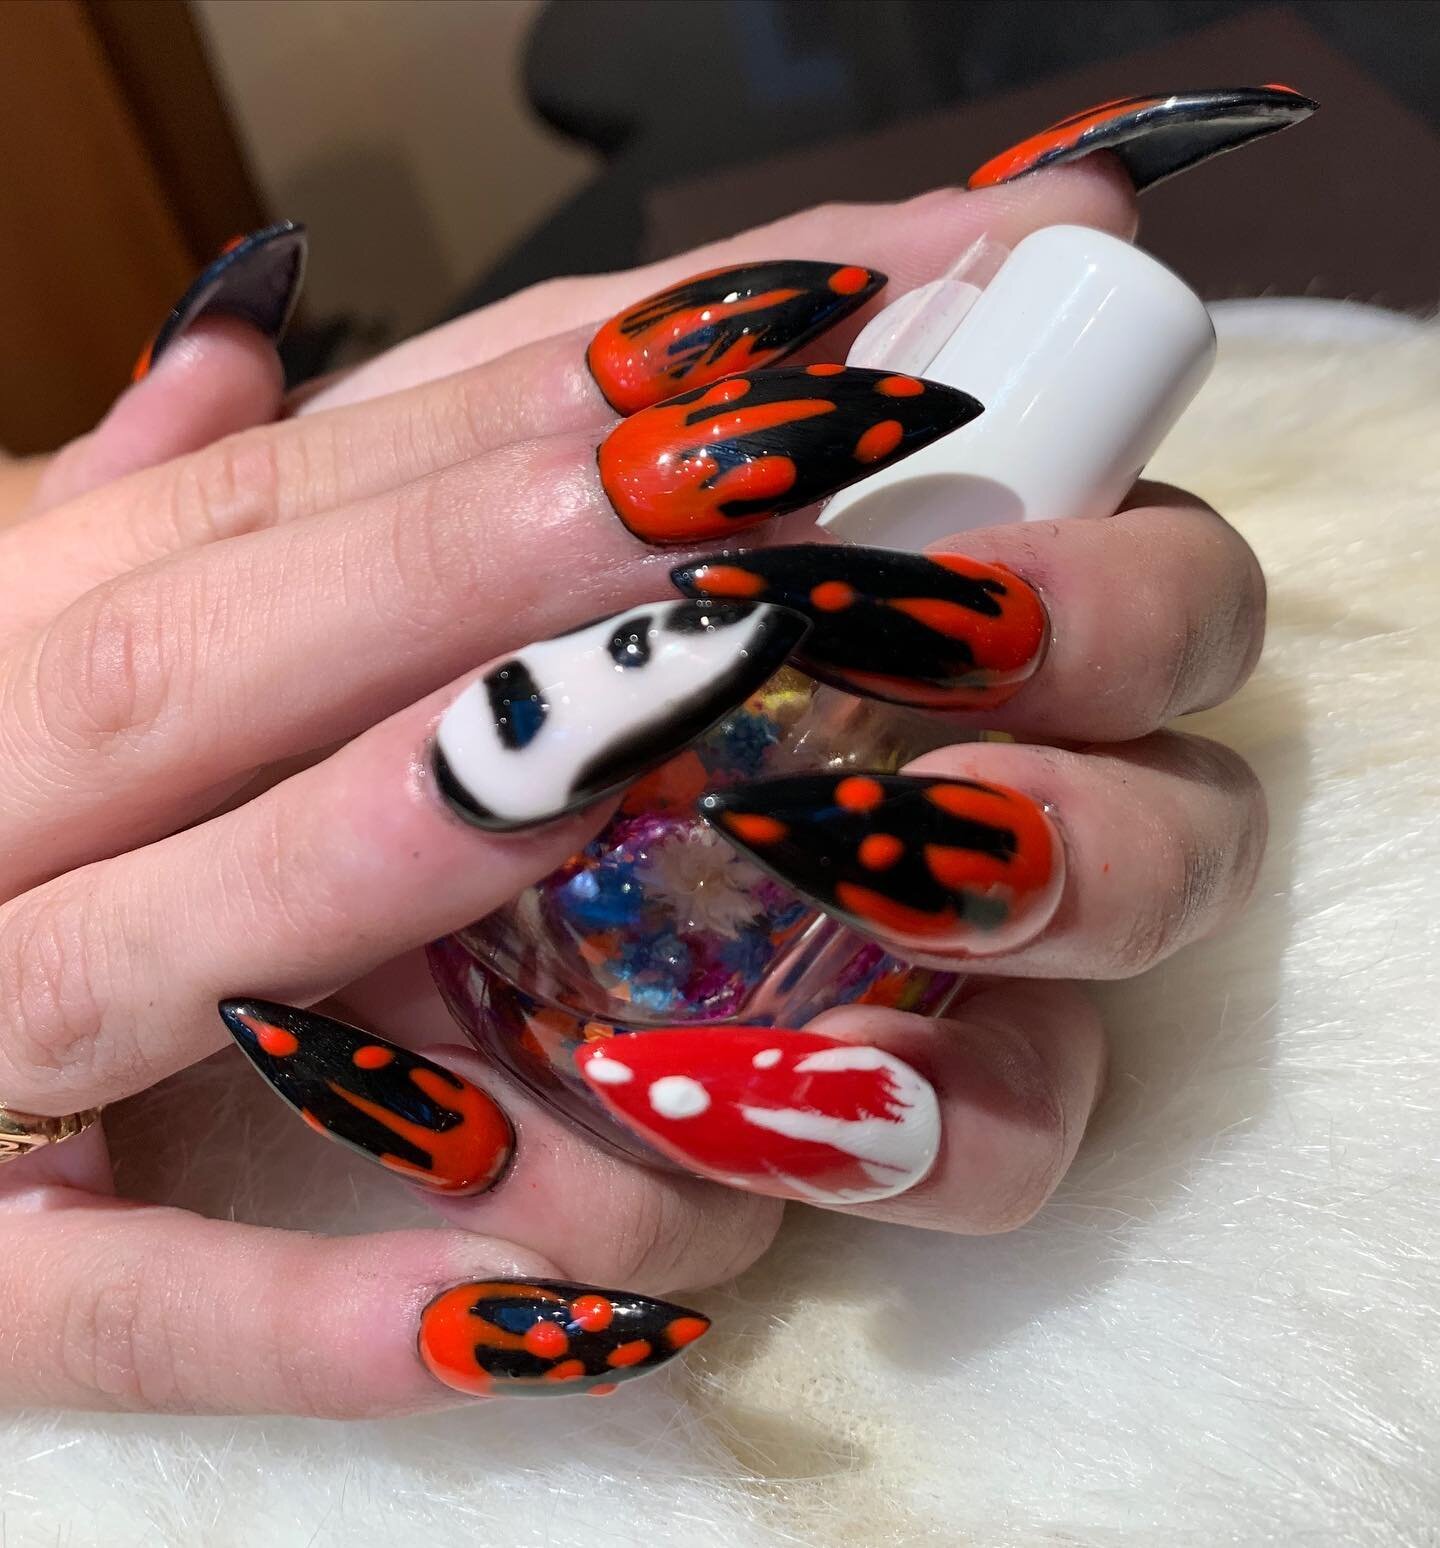 Absolutely boo-tiful nails
20 days till Halloween 🎃 👻

#nails #nail #austin #texas #smallbusiness  #localbusiness #local #gel #gelnails #nailoftheday #nailsofinstagram #acrylicnails #instanails